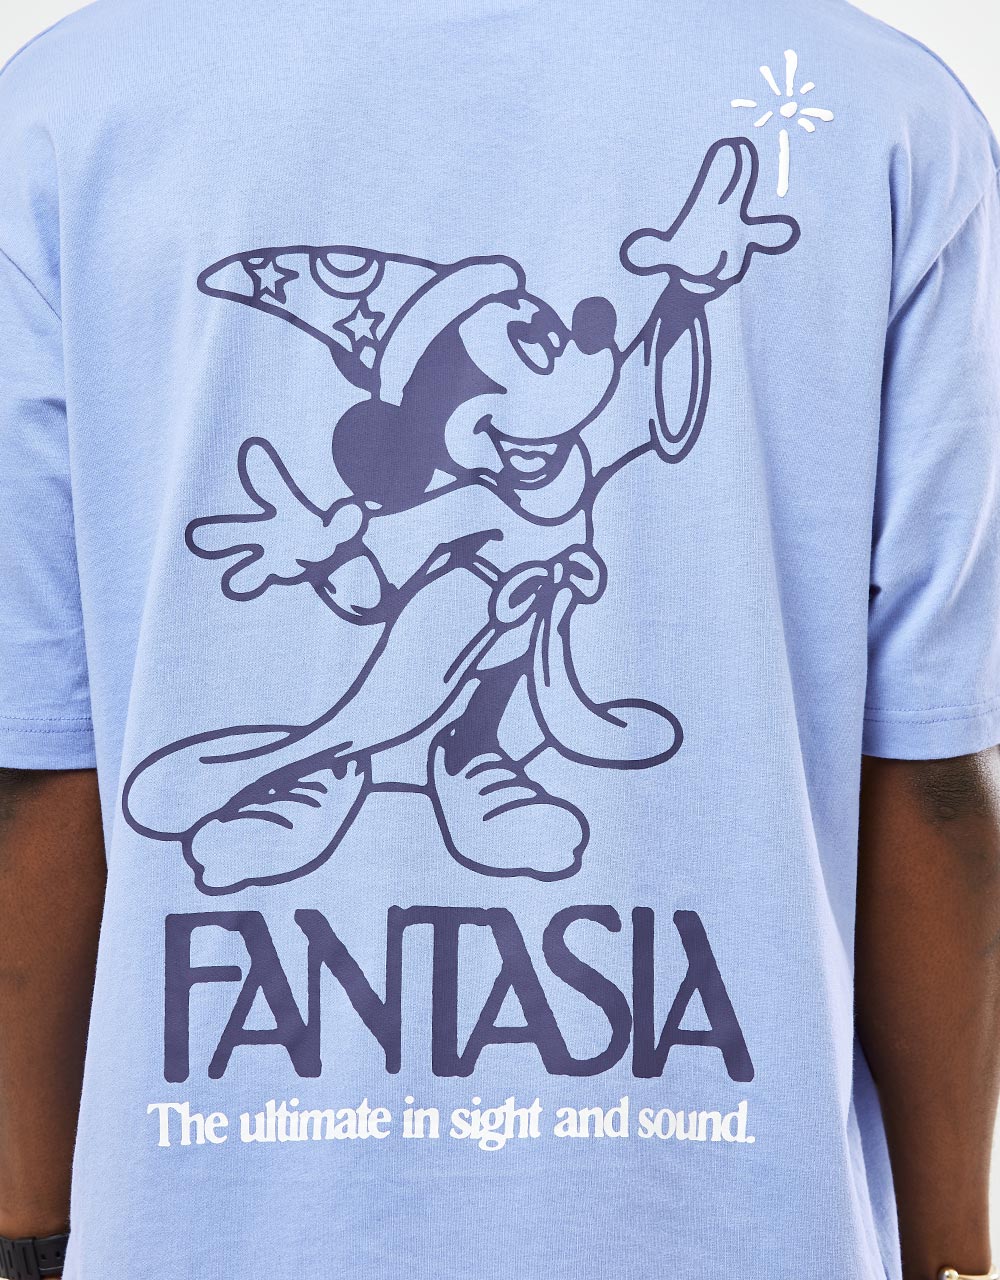 Butter Goods x Disney Sight And Sound T-Shirt - Periwinkle